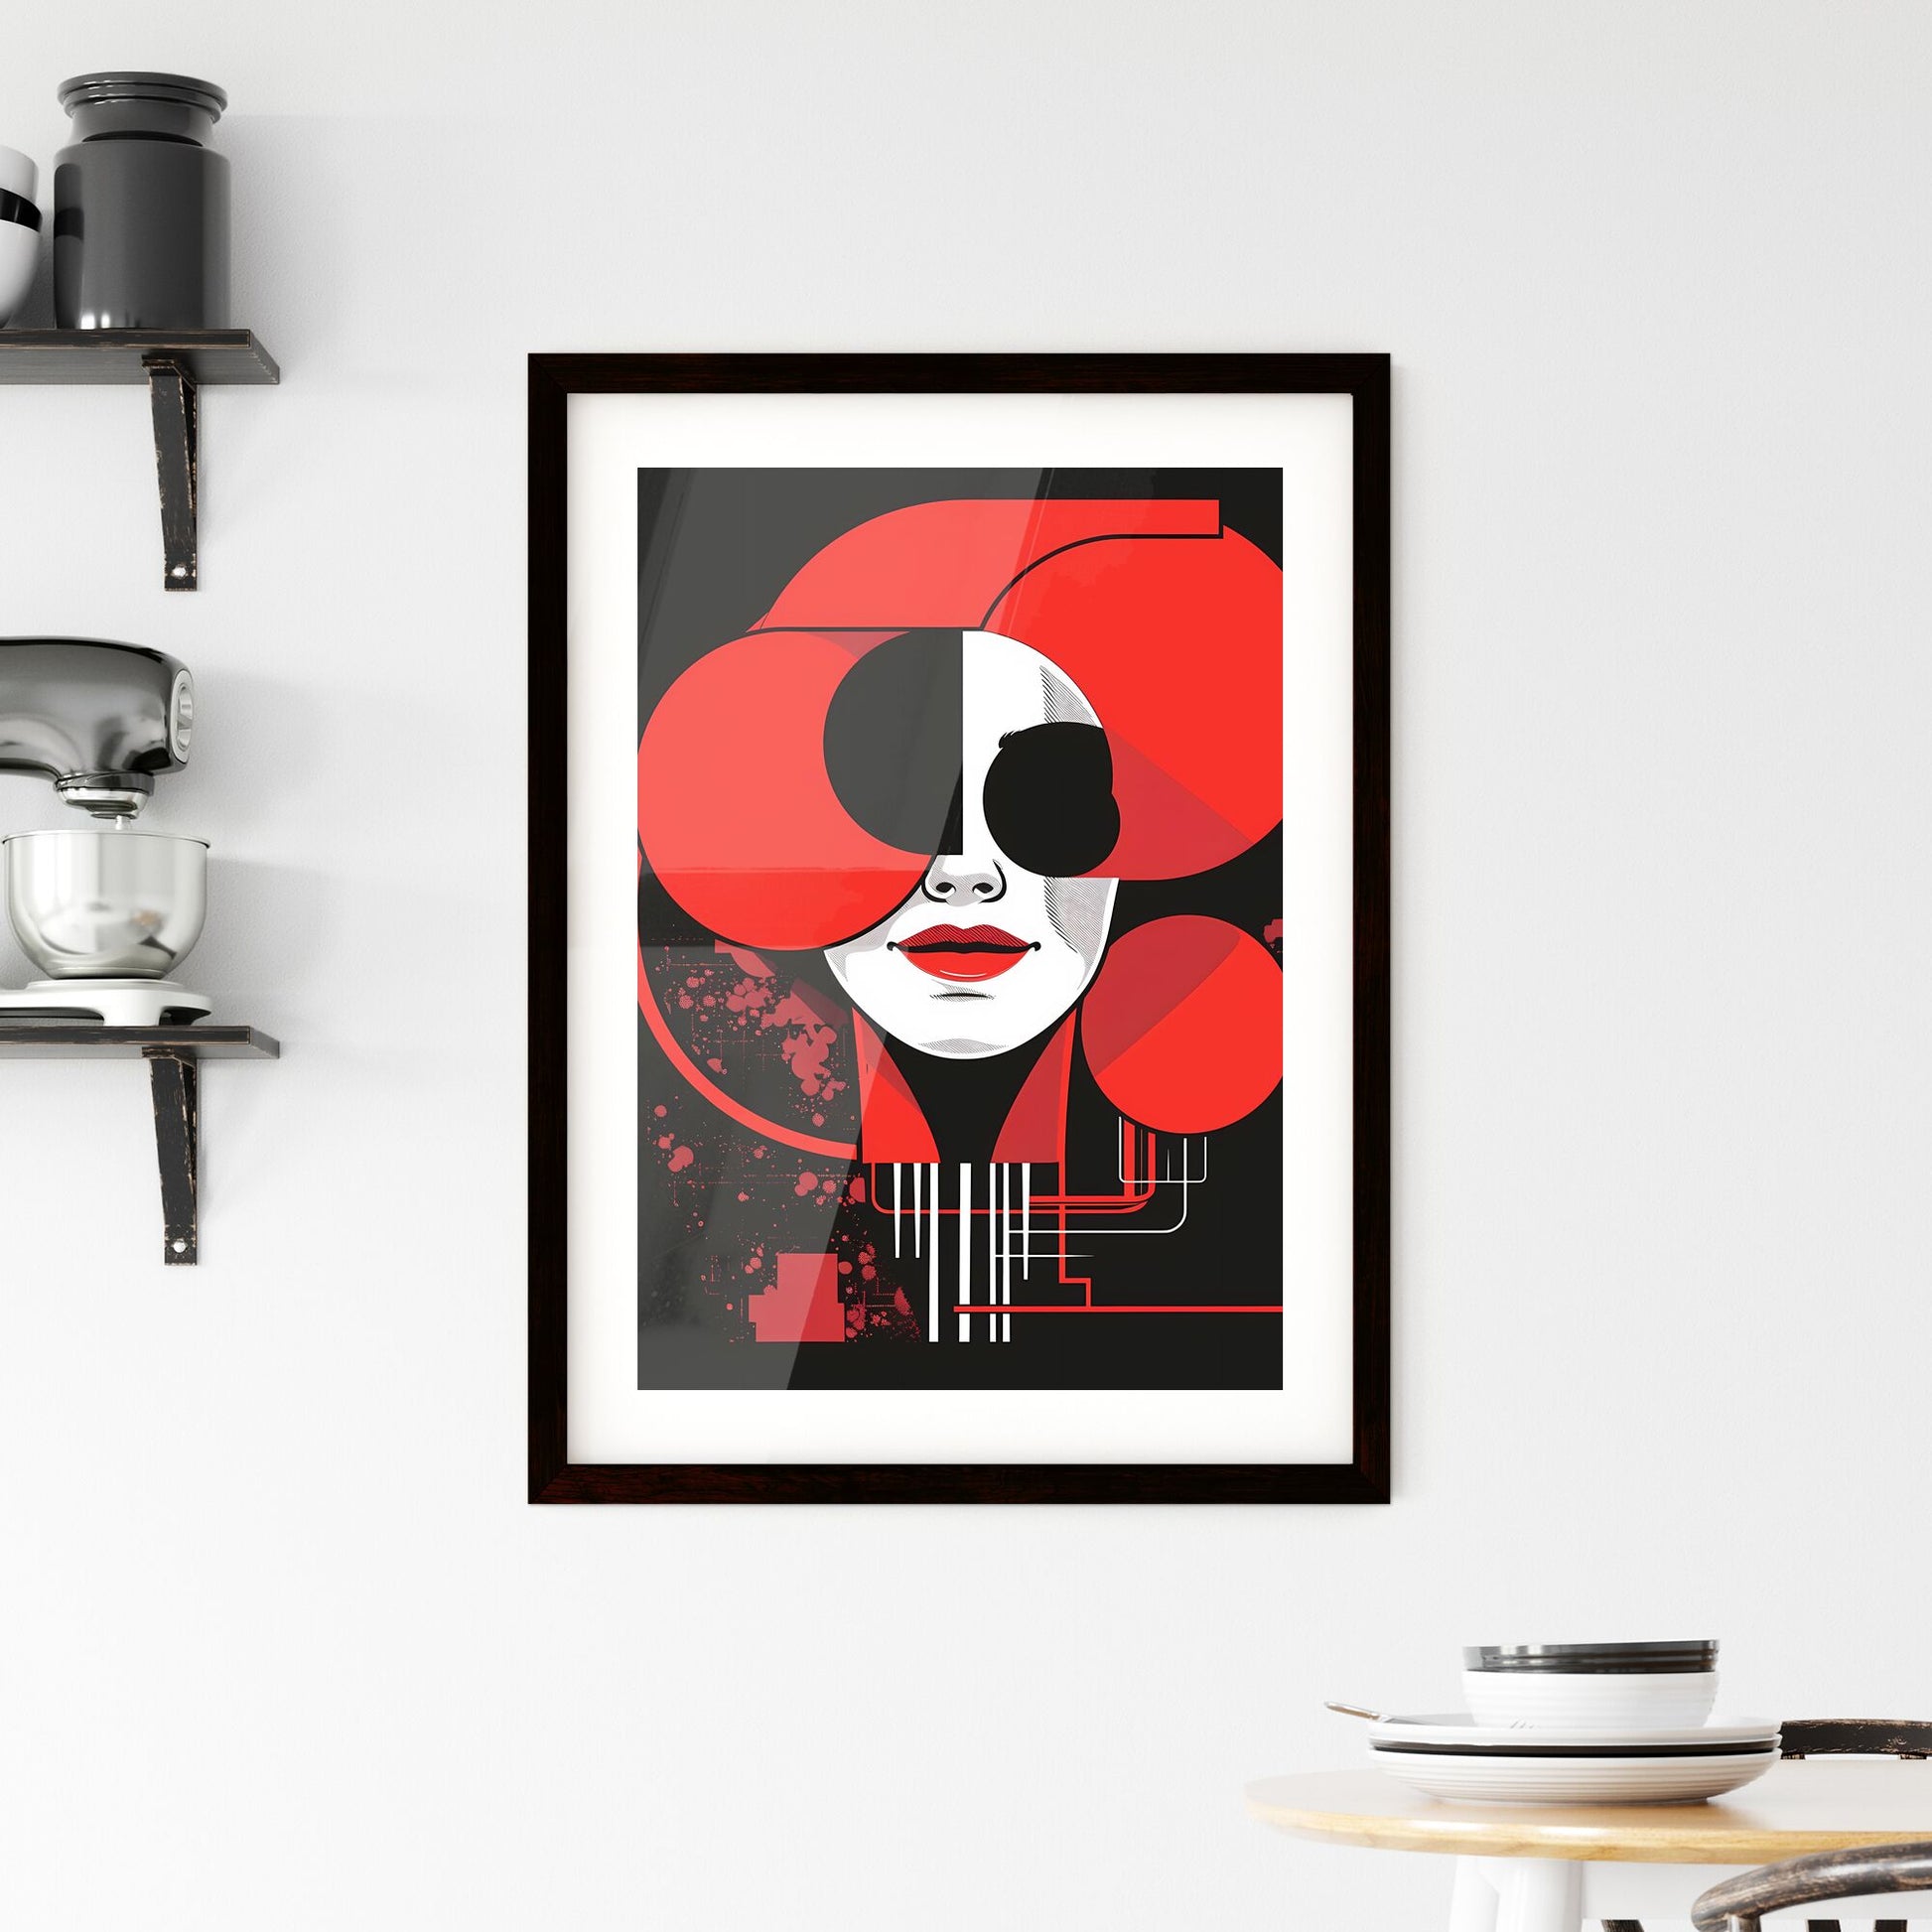 AI Workshop Poster: Modern Swiss-Style Art Depicting an Intriguing Woman's Face with Red Lips and Black Eye Patch Default Title